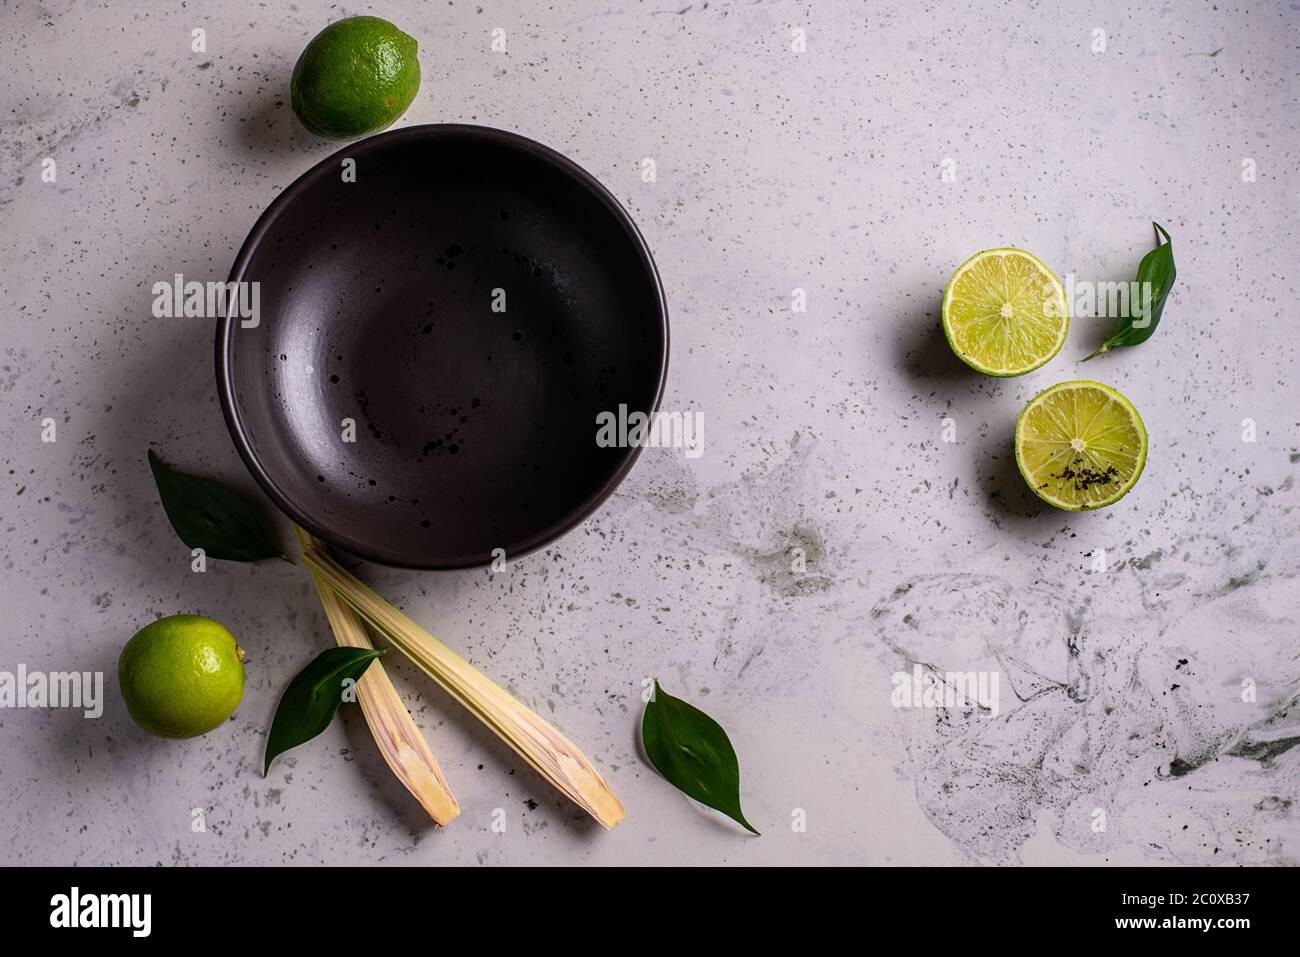 Black empty plate on marble, flatlay - stylish tableware, table decor and food menu concept. Serve the perfect dish Stock Photo